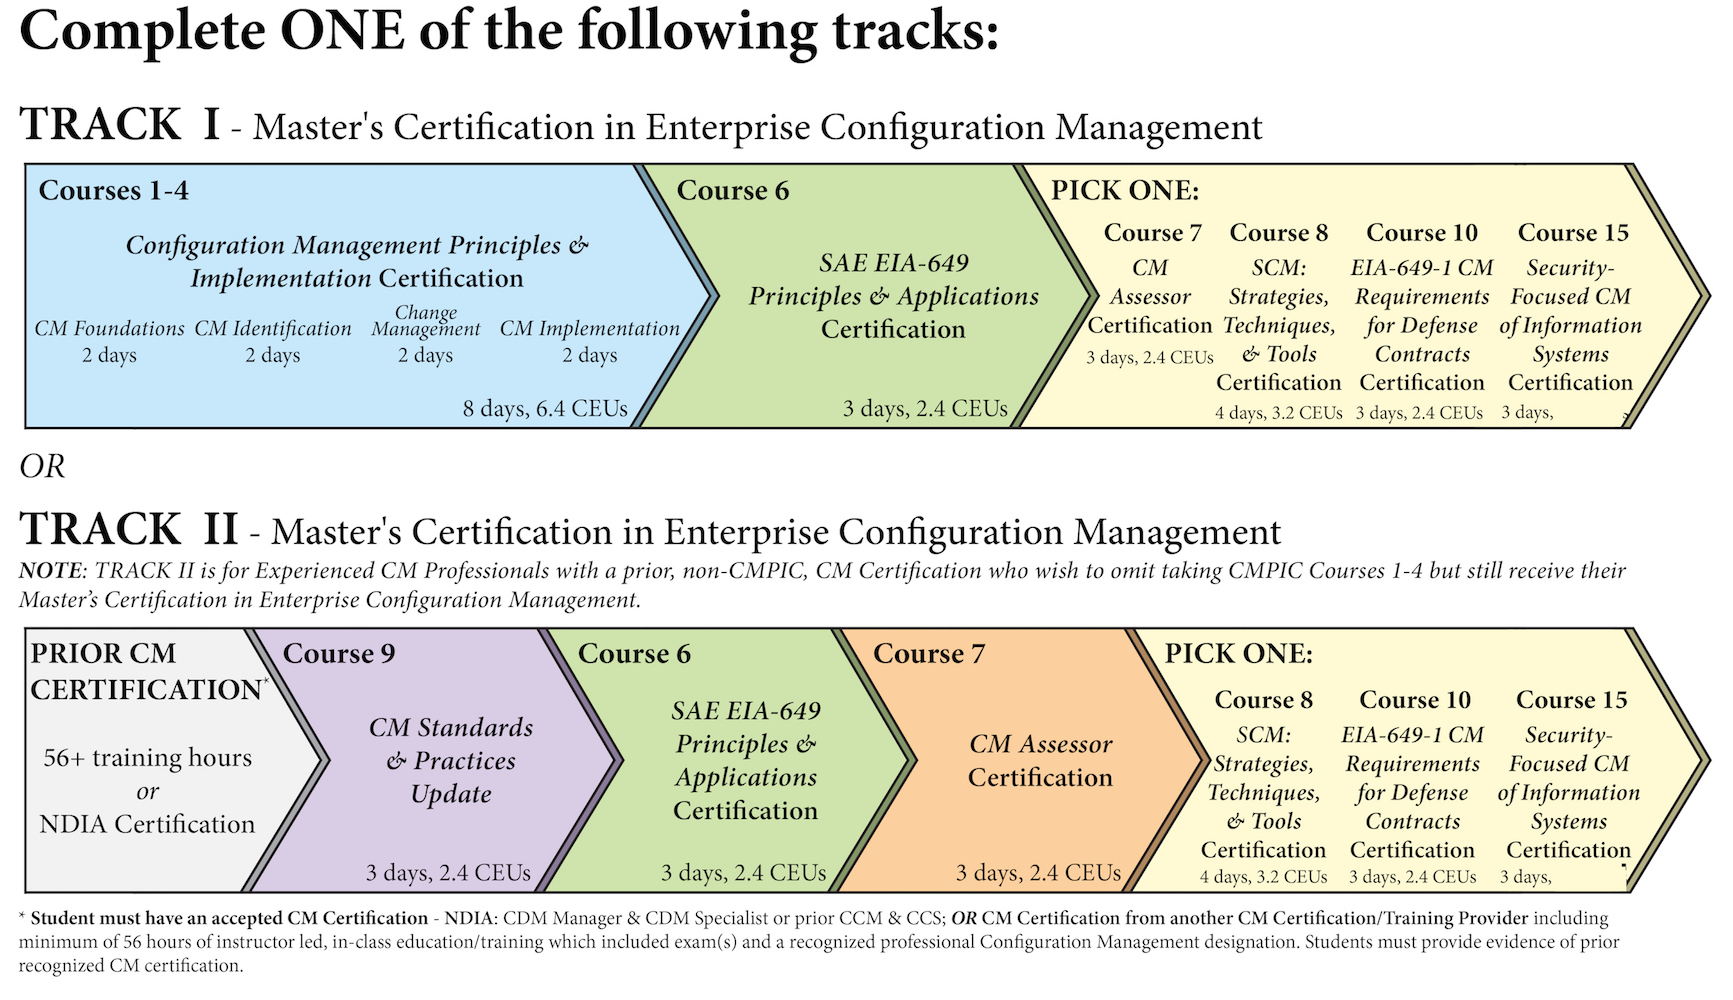 Table with class overview of requirements for the CMPIC Masters Certification in Enterprise Configuration Management.